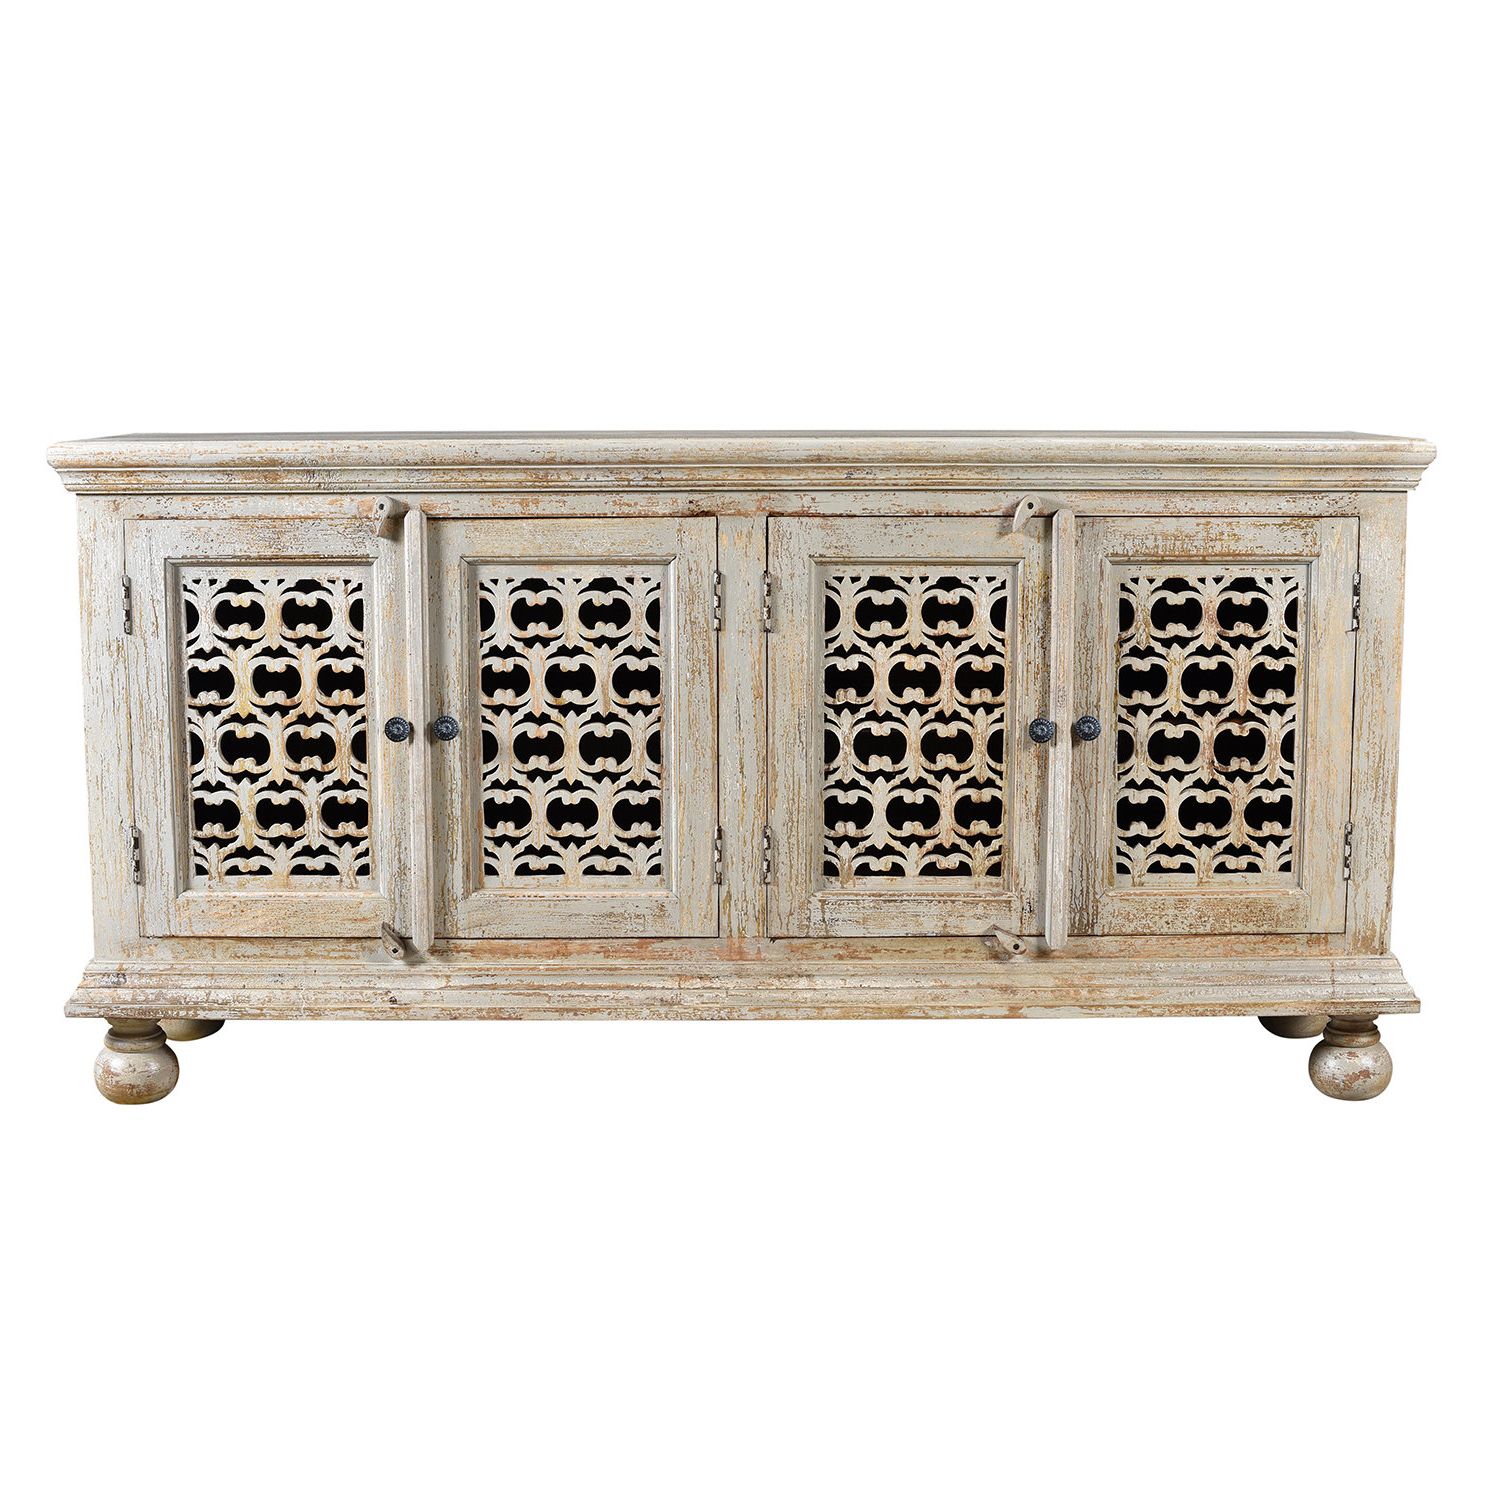 World Menagerie Pomona Mango Wood Aged 4 Door Carved Sideboard Throughout Current Mango Wood Grey 4 Drawer 4 Door Sideboards (View 4 of 20)